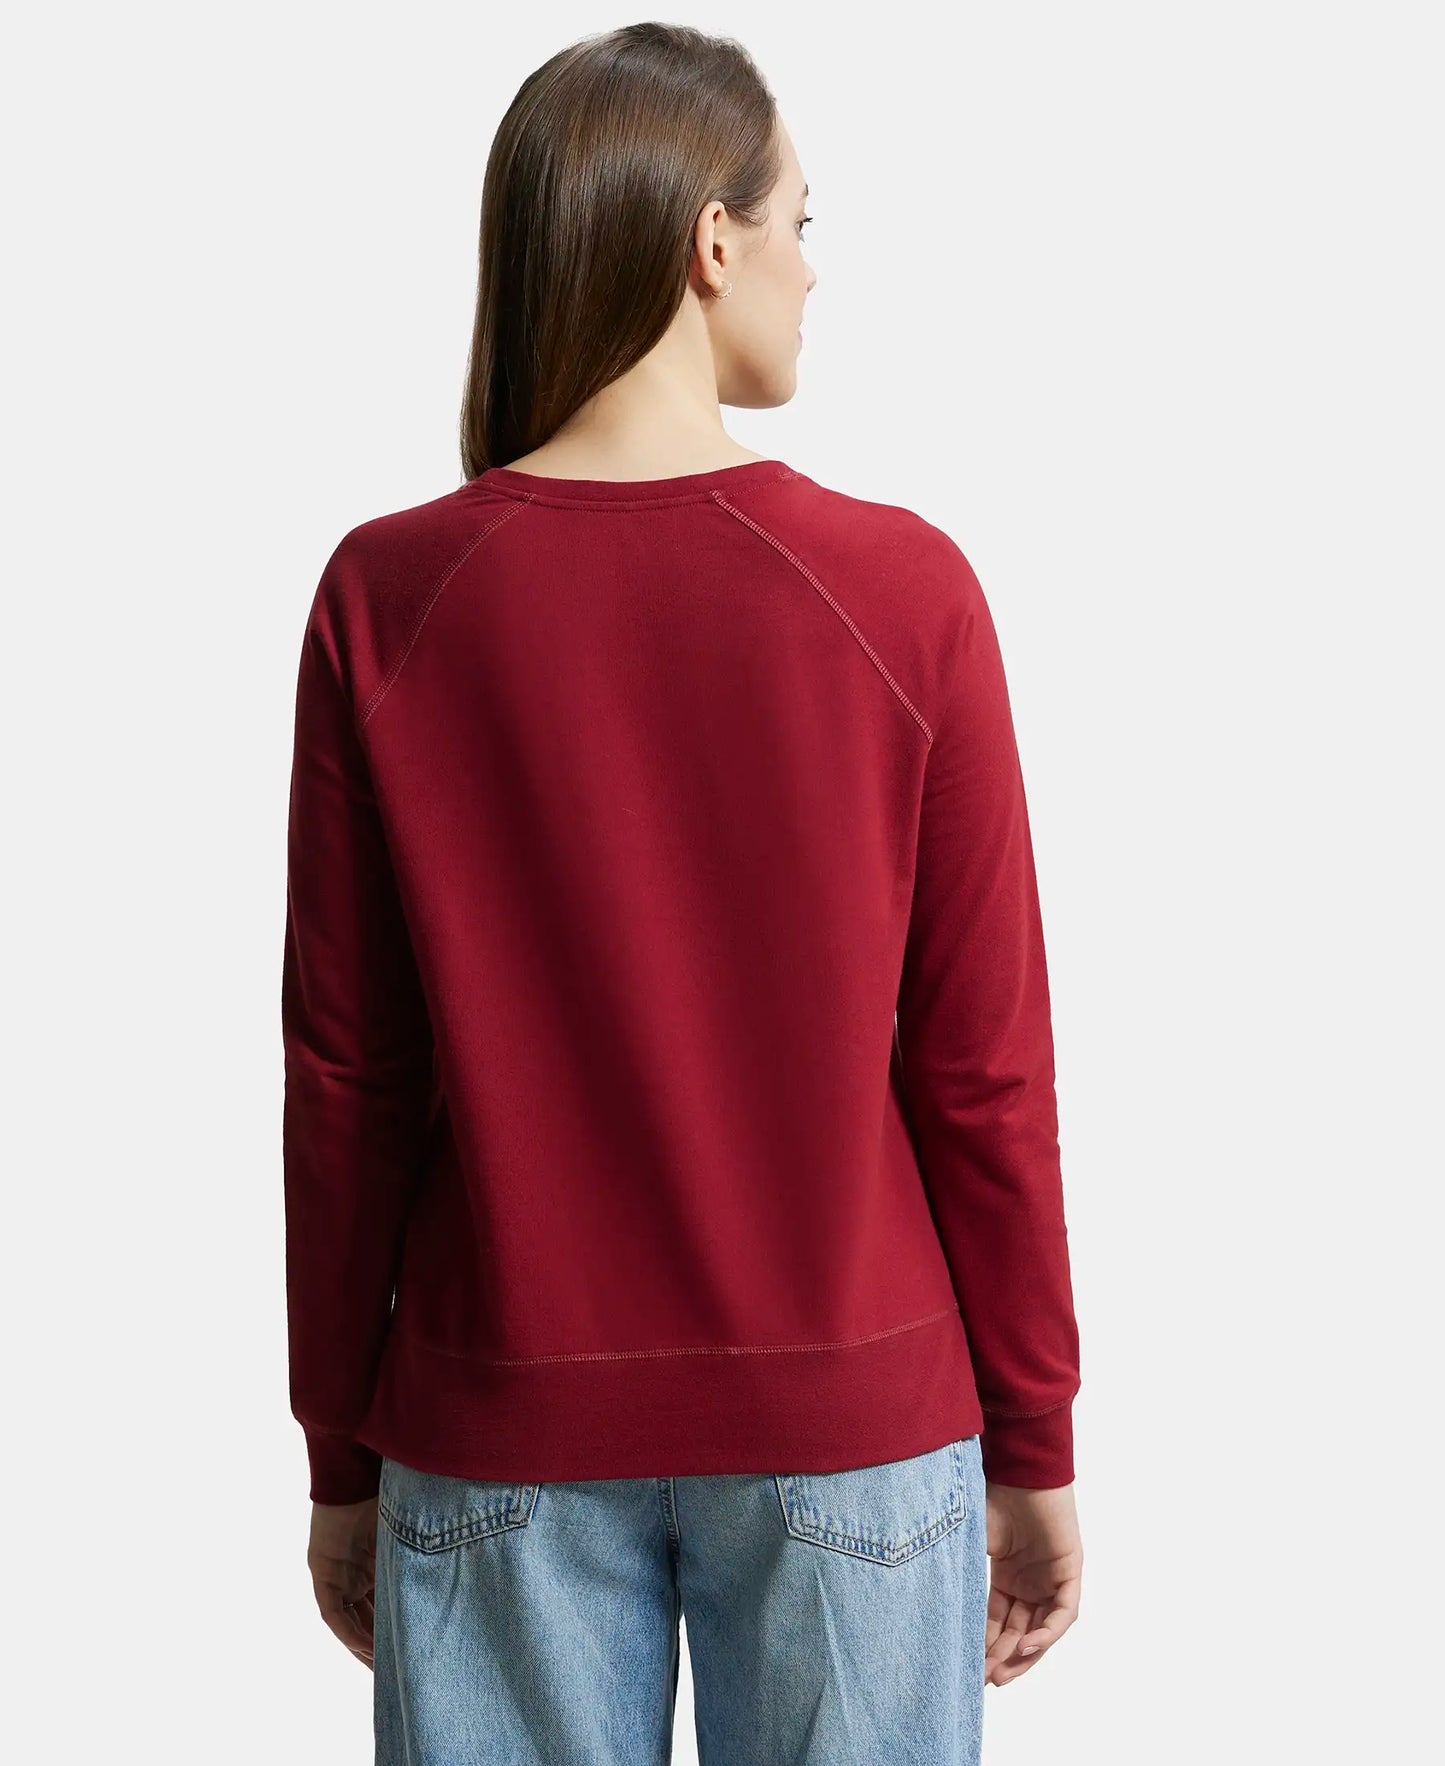 Super Combed Cotton Rich French Terry Fabric Solid Sweatshirt with Raglan Sleeve Styling - Rhubarb-3